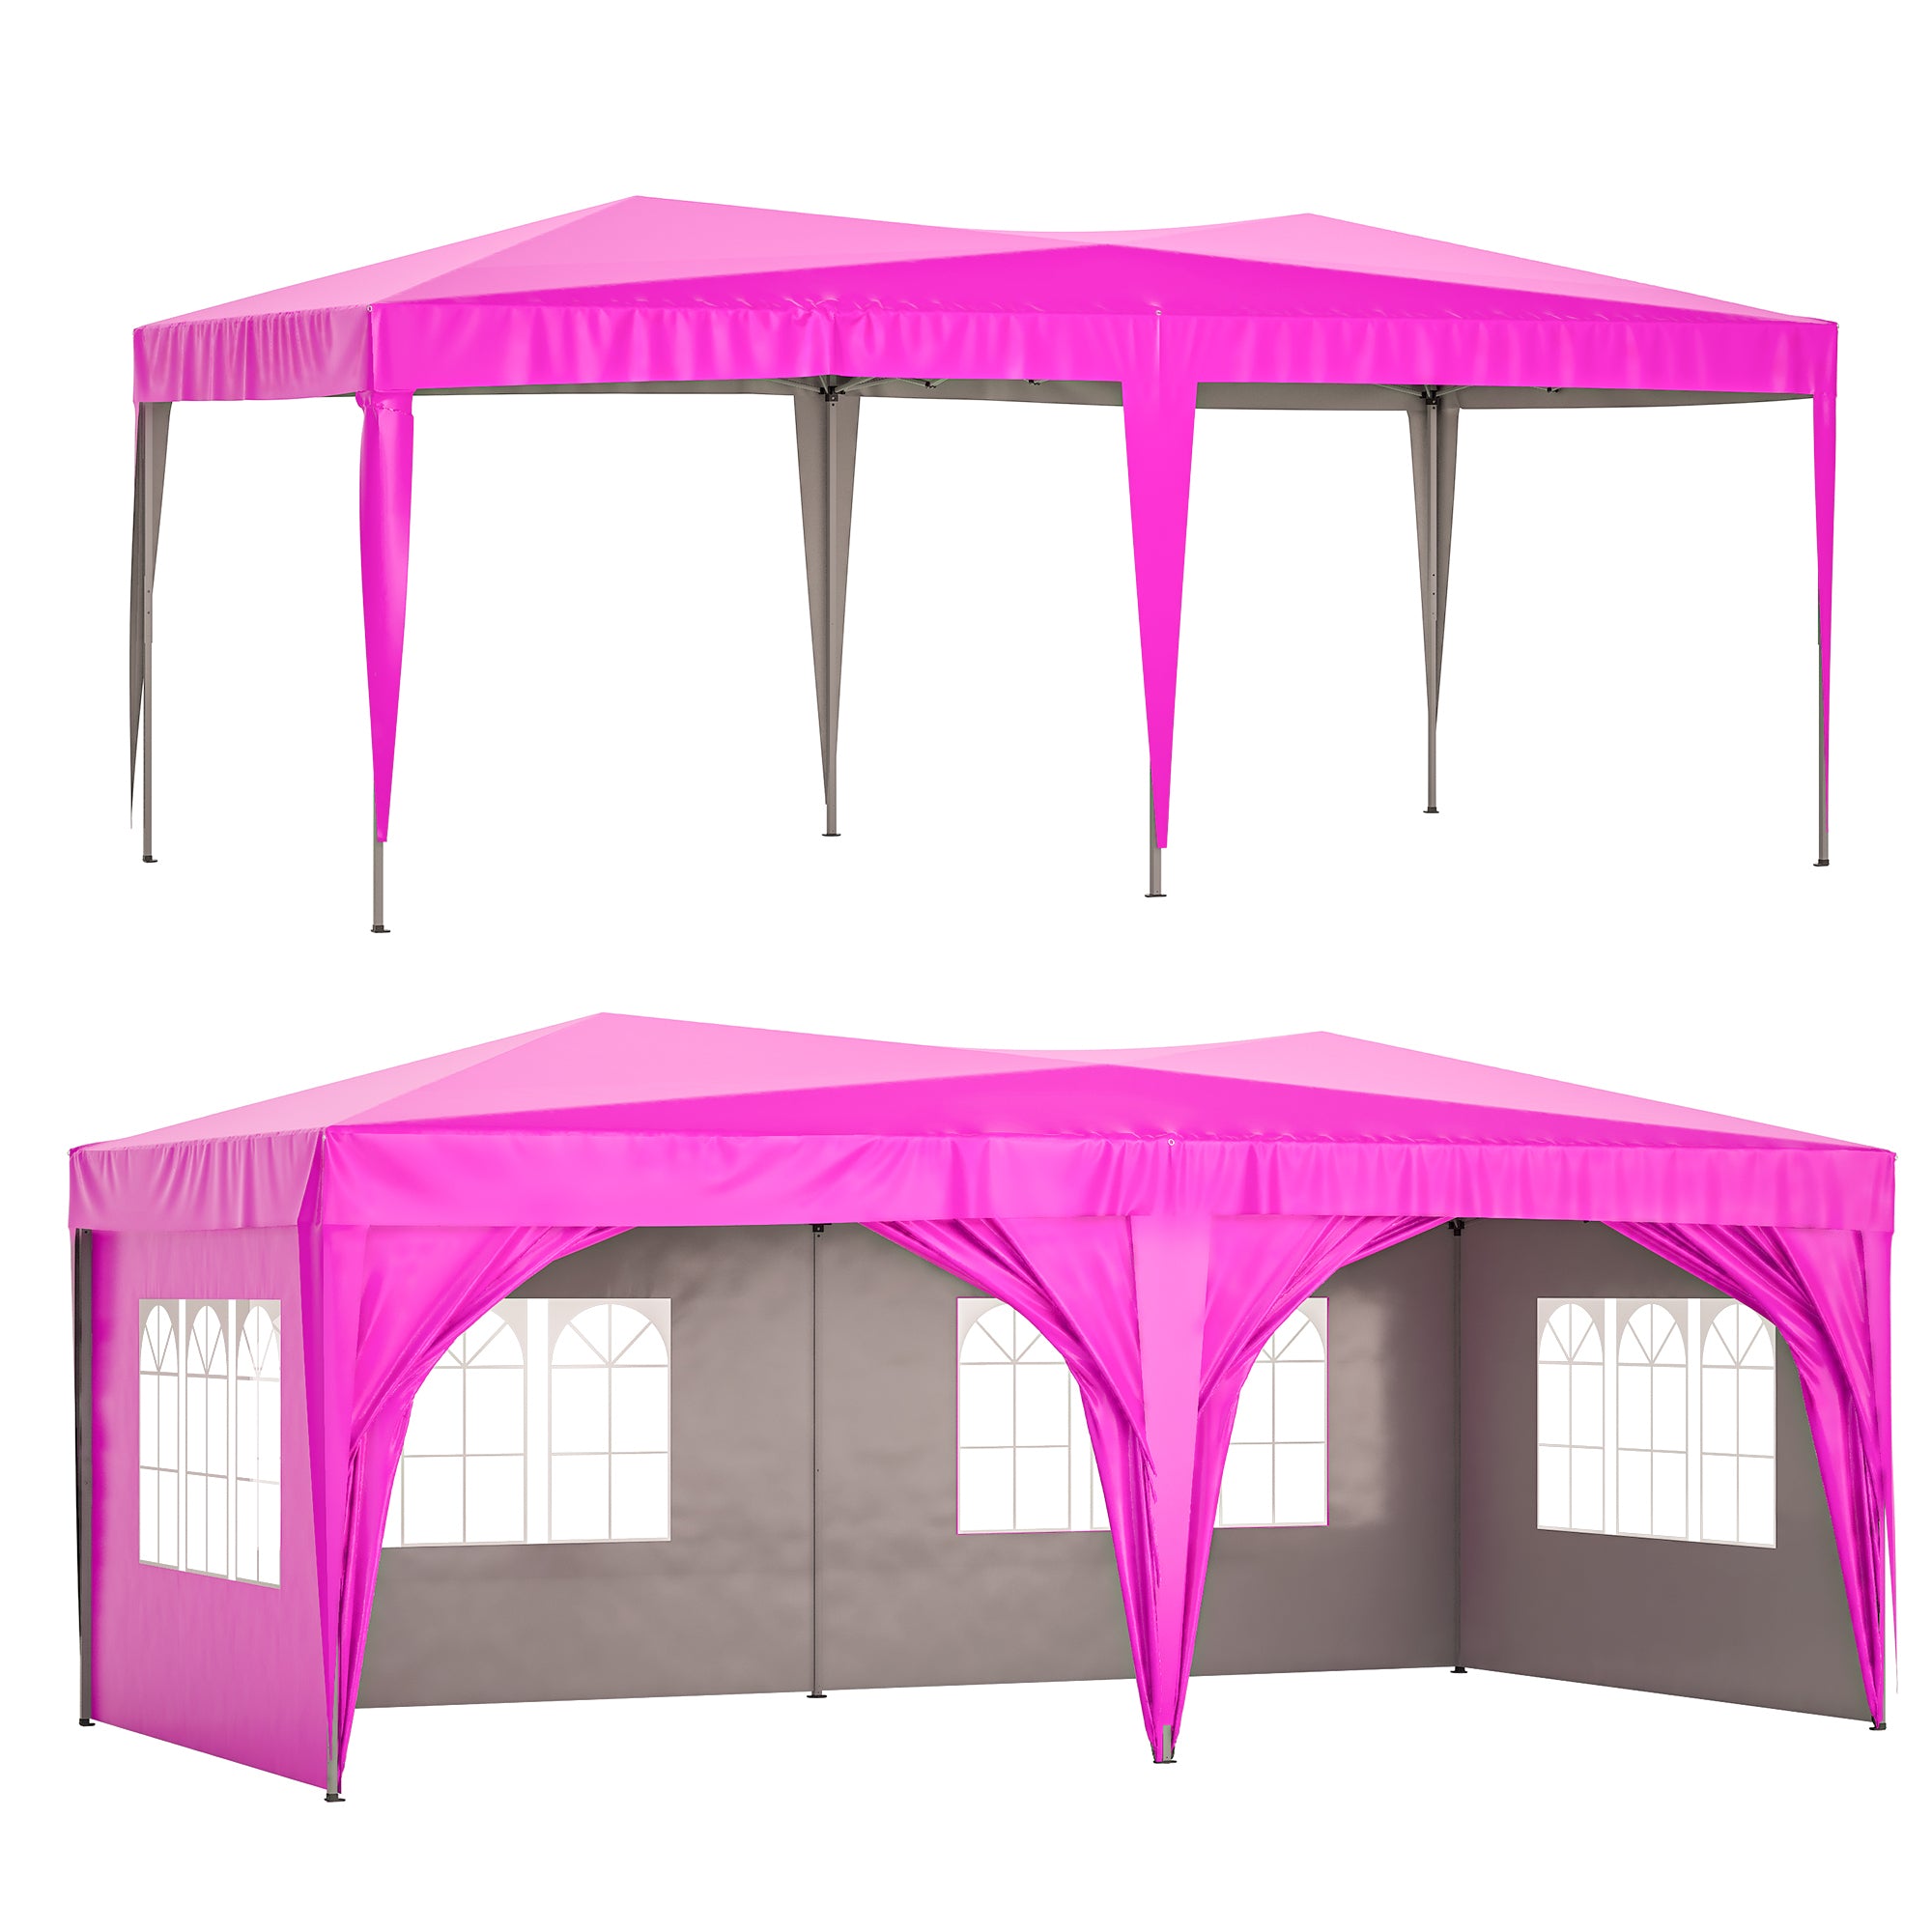 10'x20'-EZ-Pop-Up-Canopy-Outdoor-Portable-Party-Folding-Tent-with-6-Removable-Sidewalls-+-Carry-Bag-+-6pcs-Weight-Bag-Beige-Pink-